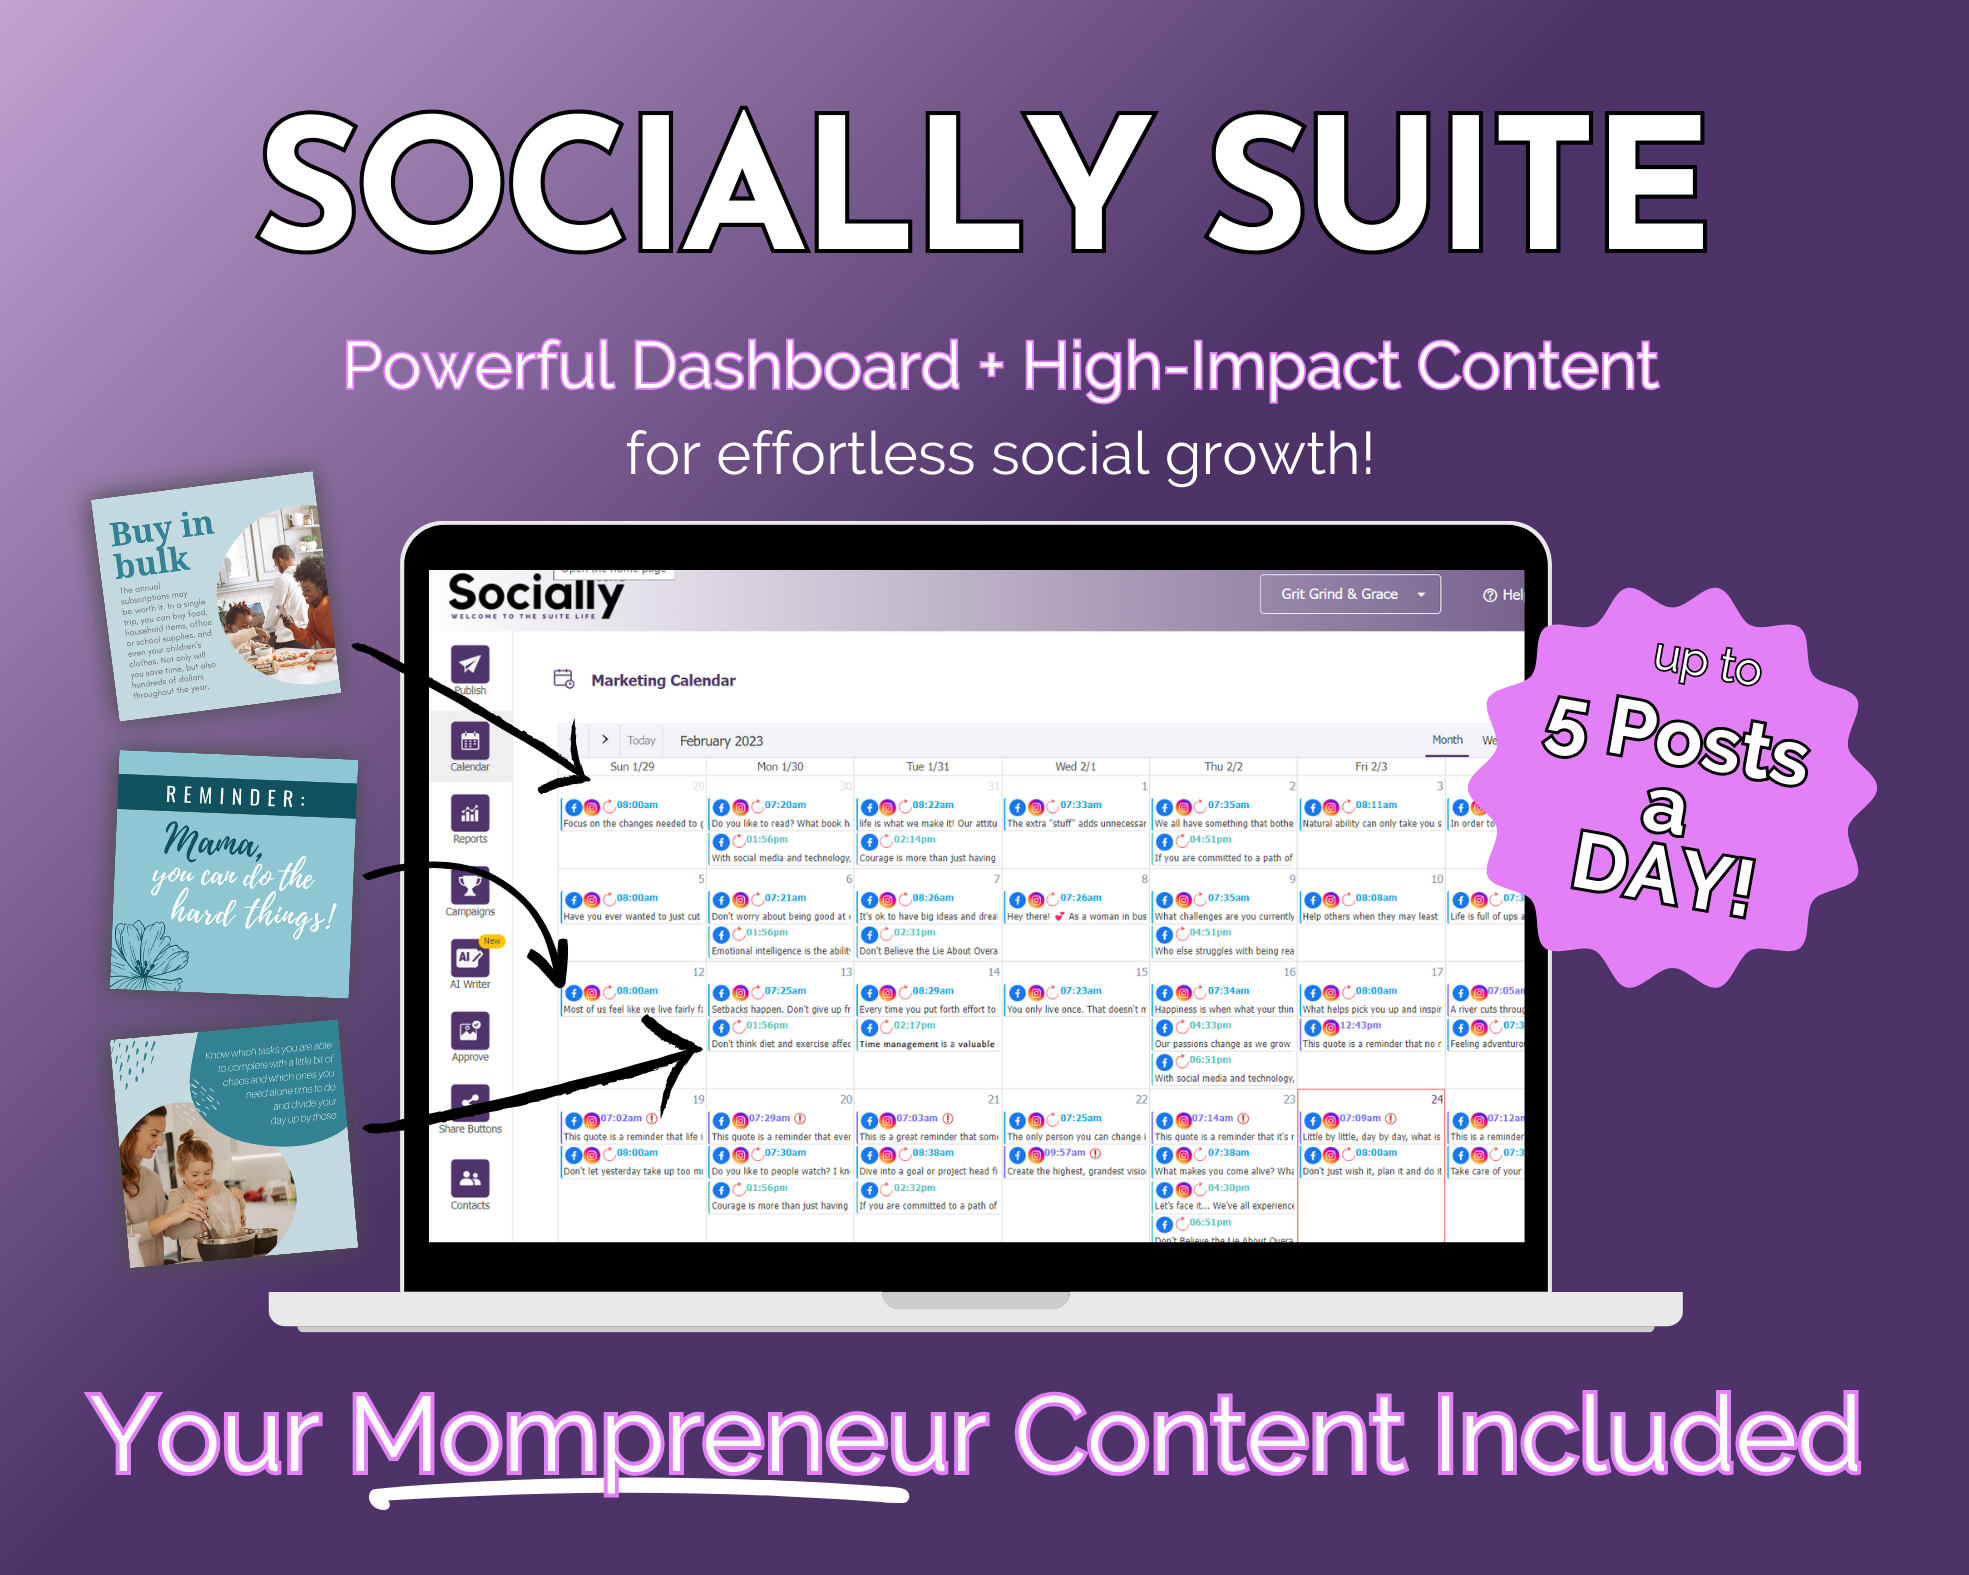 Get Socially Inclined Socially Suite Membership - powerful dashboard - high content for your mompreneur content. The Get Socially Inclined Socially Suite Membership offers a powerful dashboard for efficient content management and effective social media marketing strategies.